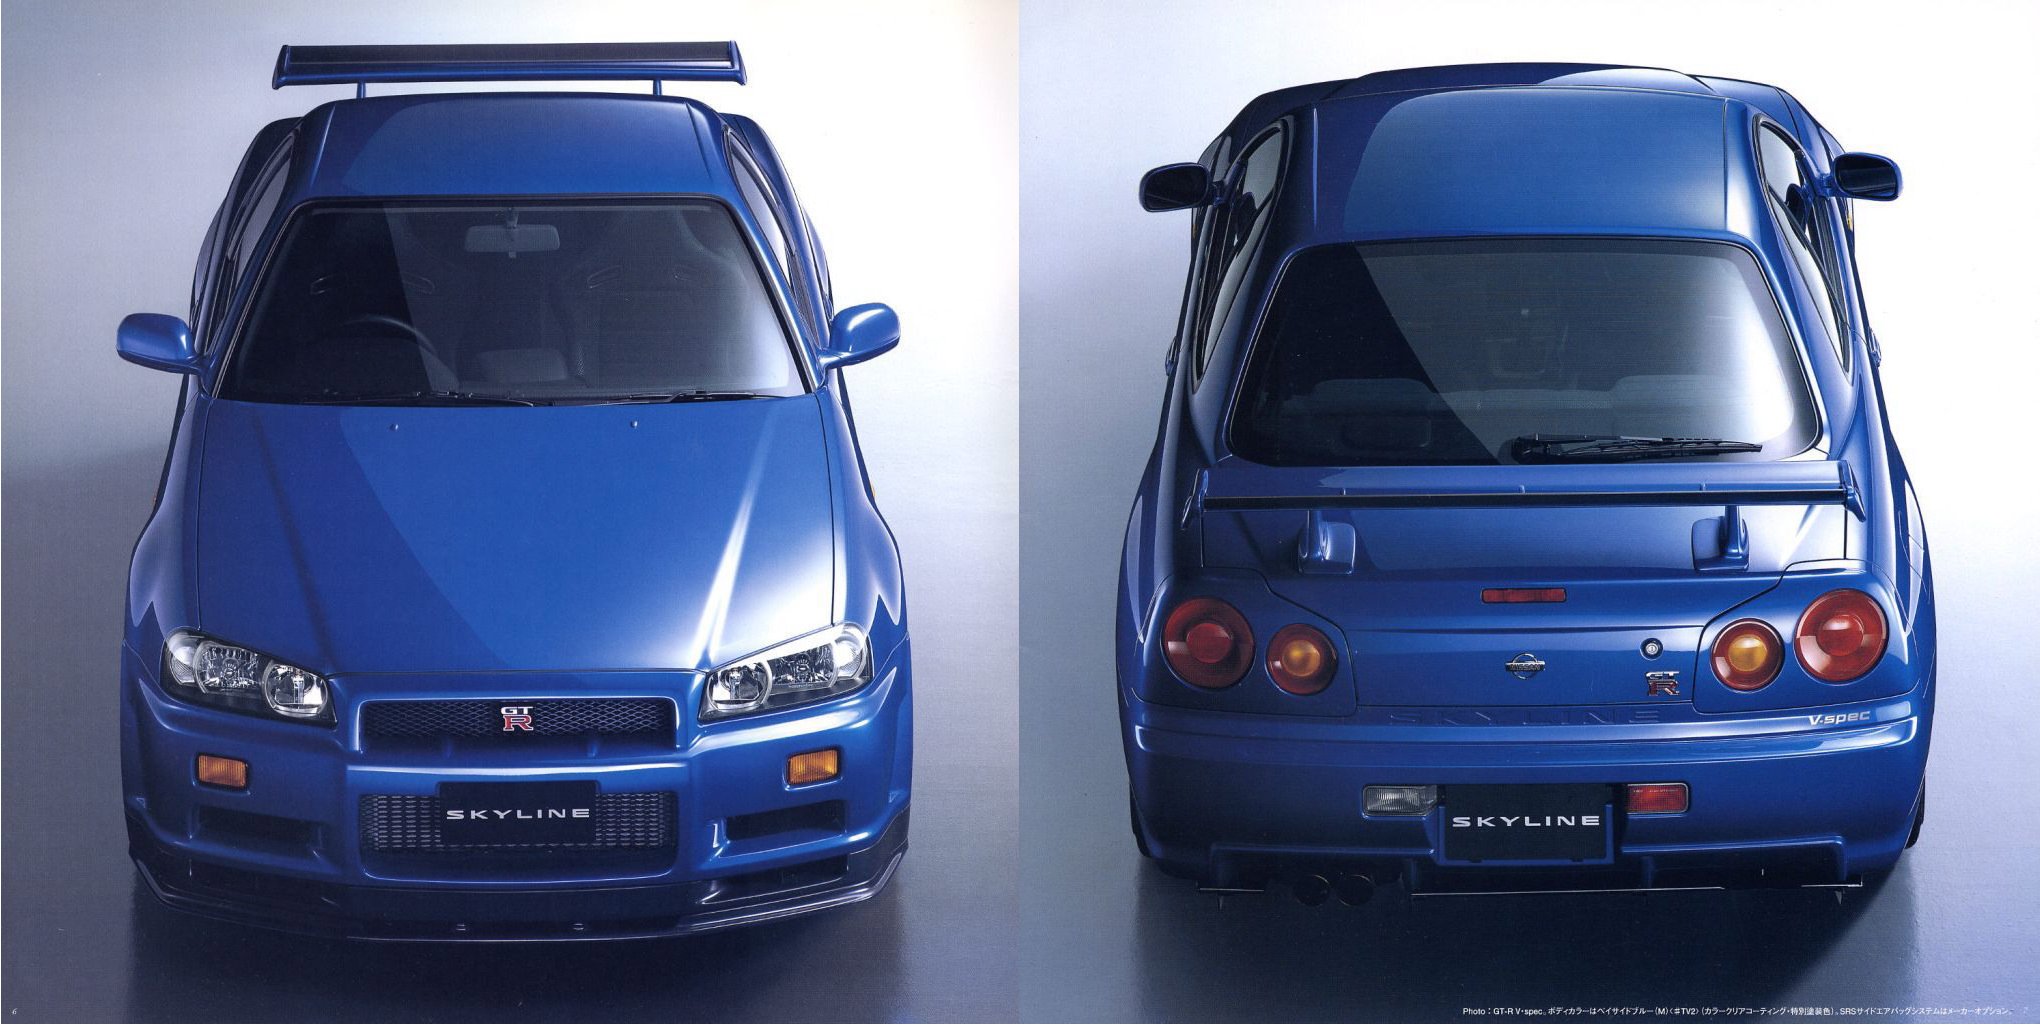 The Nissan Skyline R34 GT-R was nearly powered by a V6